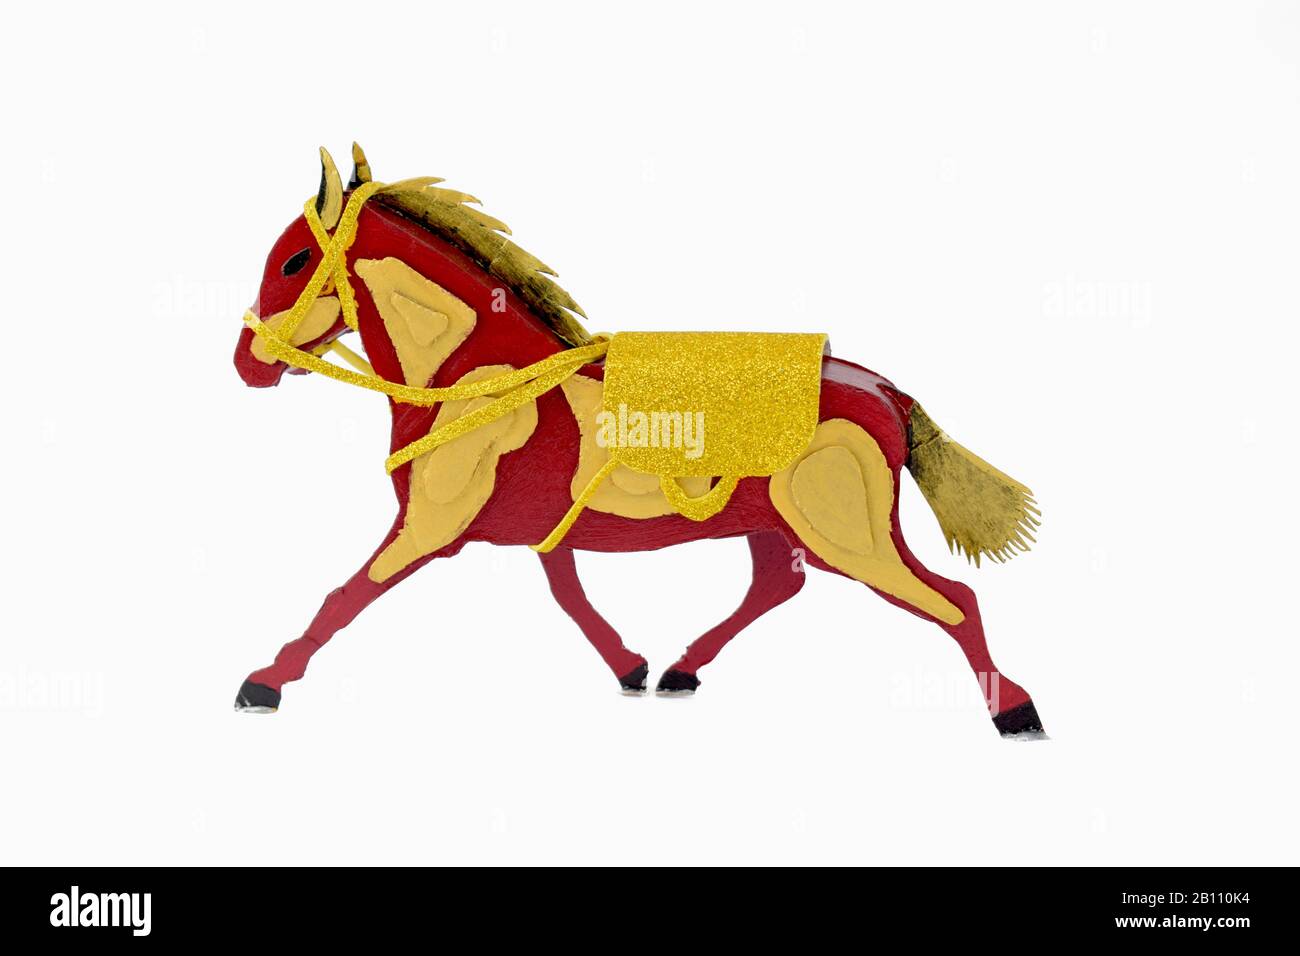 A crafted horse made of colorful cardboard displayed over an isolated white background Stock Photo